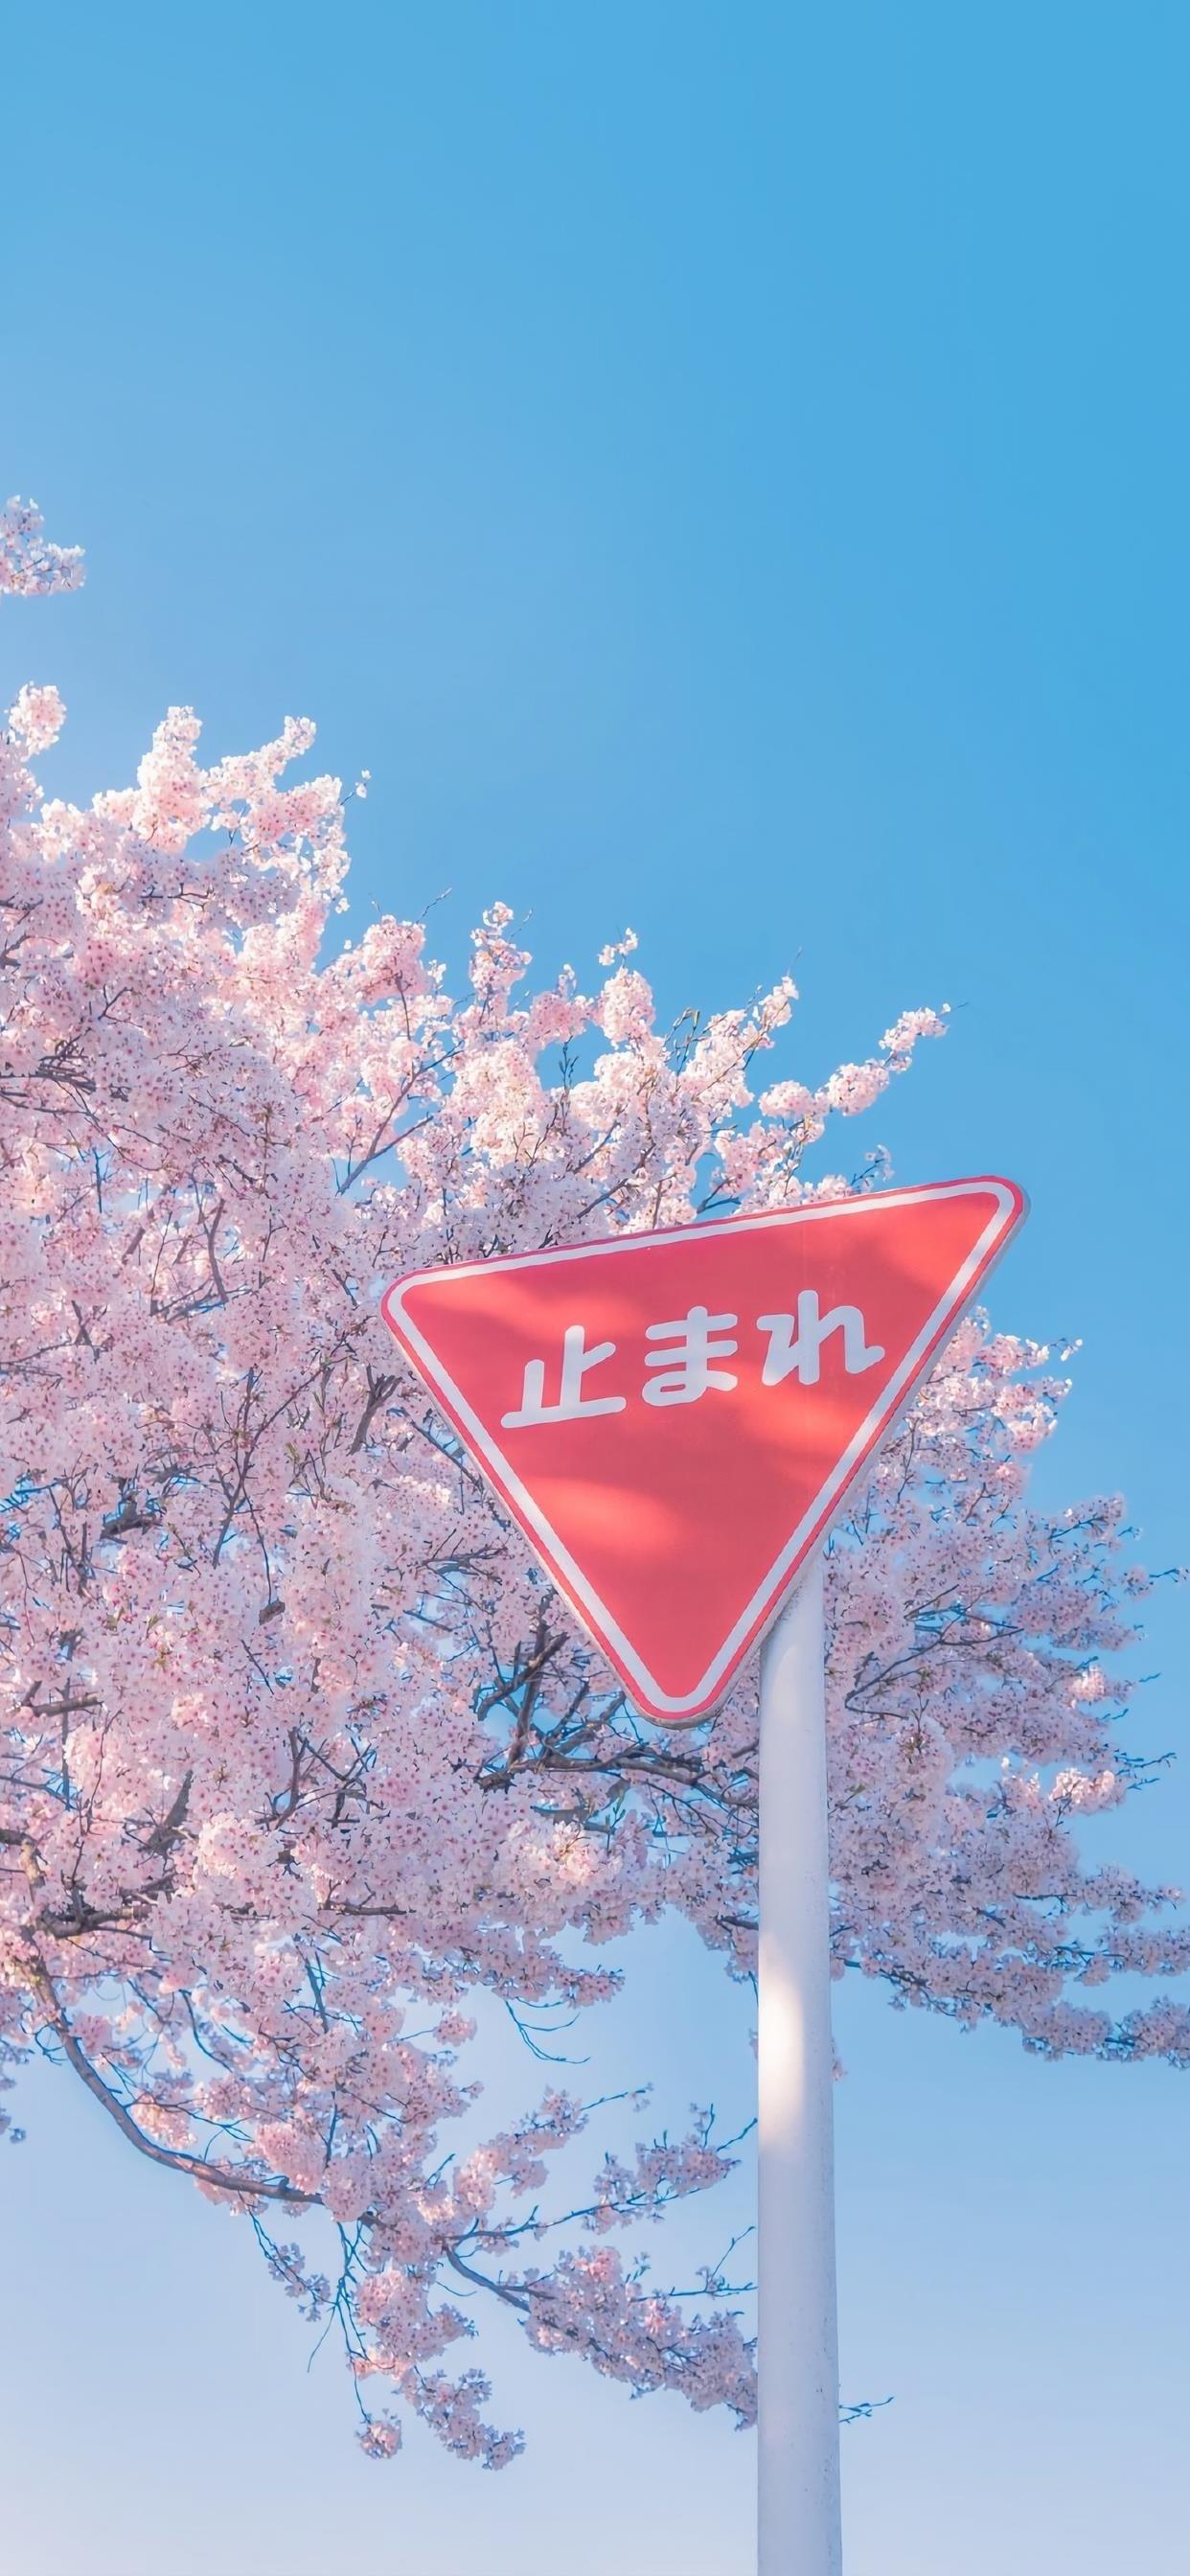 Cherry Trees Road Sign Vertical Sky 1242x2688